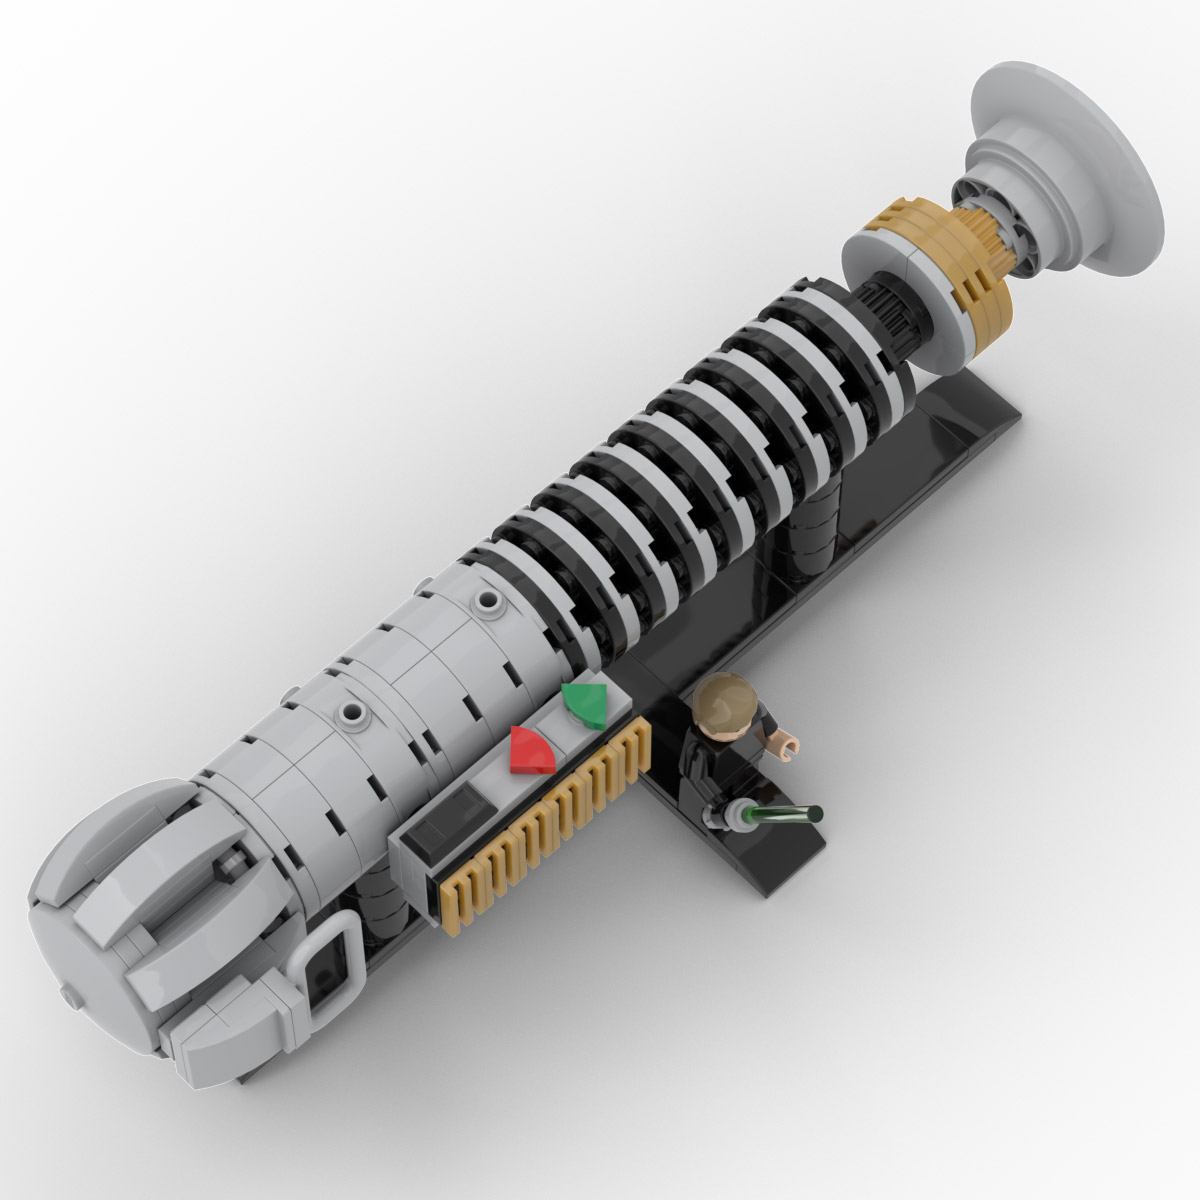 Star Wars Luke Skywalker Lightsaber from Return of the Jedi made with LEGO parts 